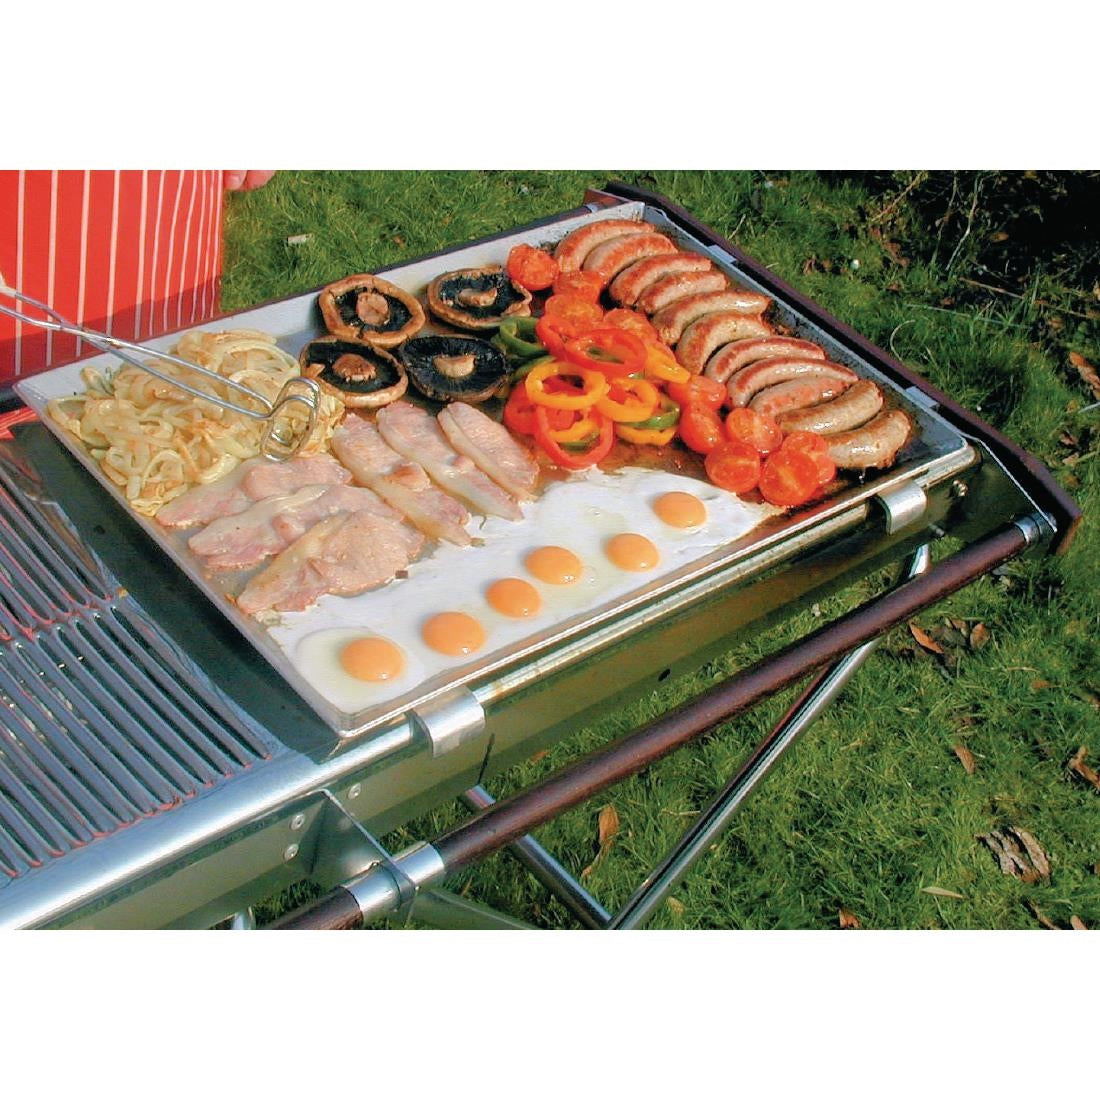 AE020 Cinders BBQ Universal Grill ref FG1 JD Catering Equipment Solutions Ltd